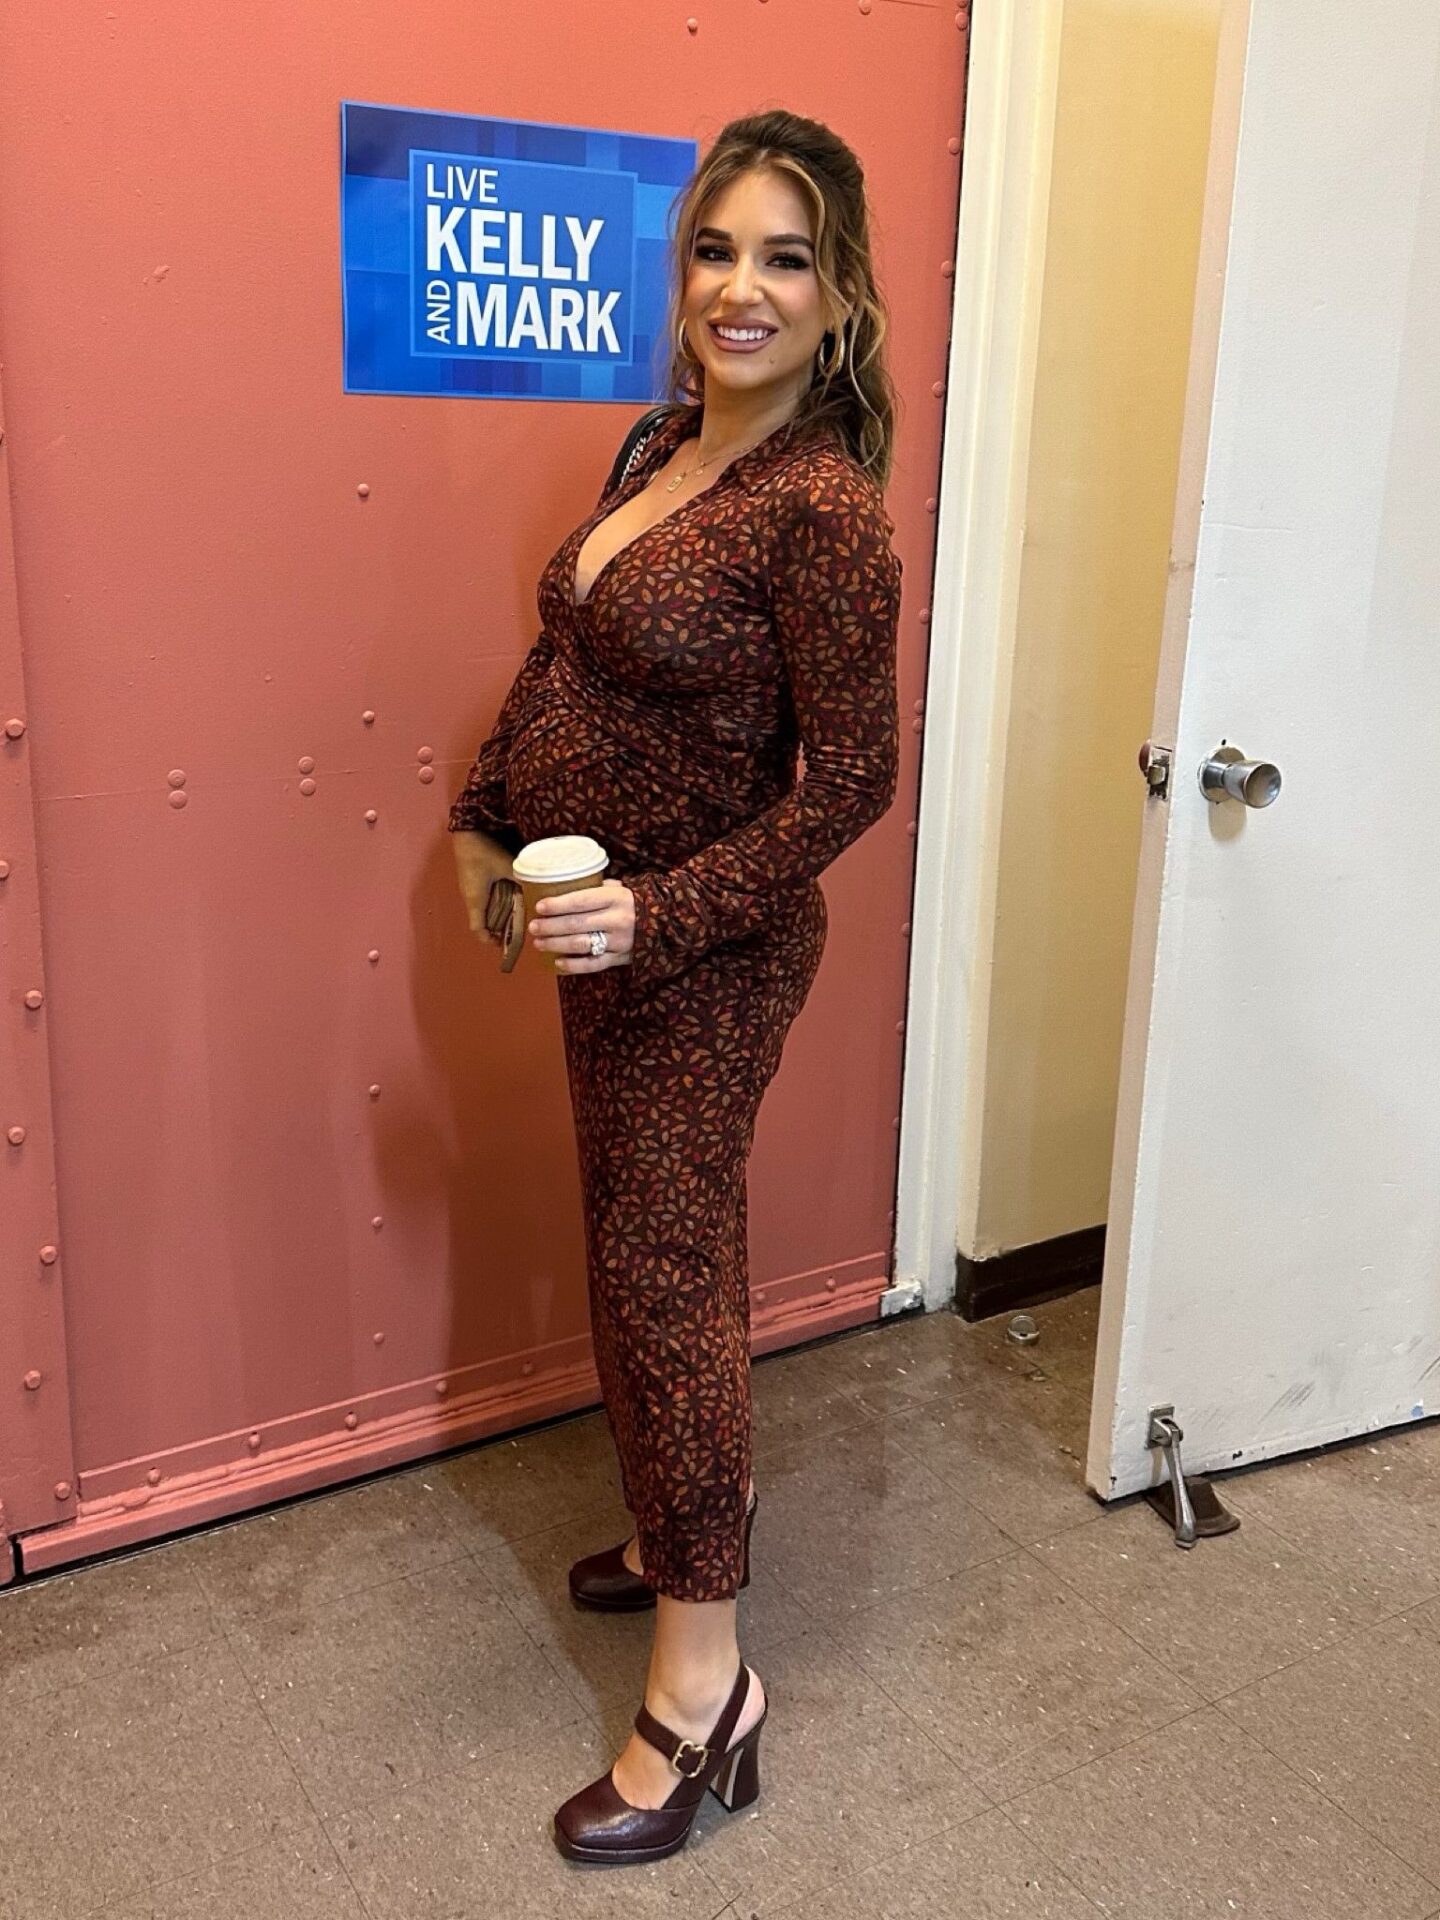 Jessie James Decker - Live with Kelly and Mark | Lucy Hale style